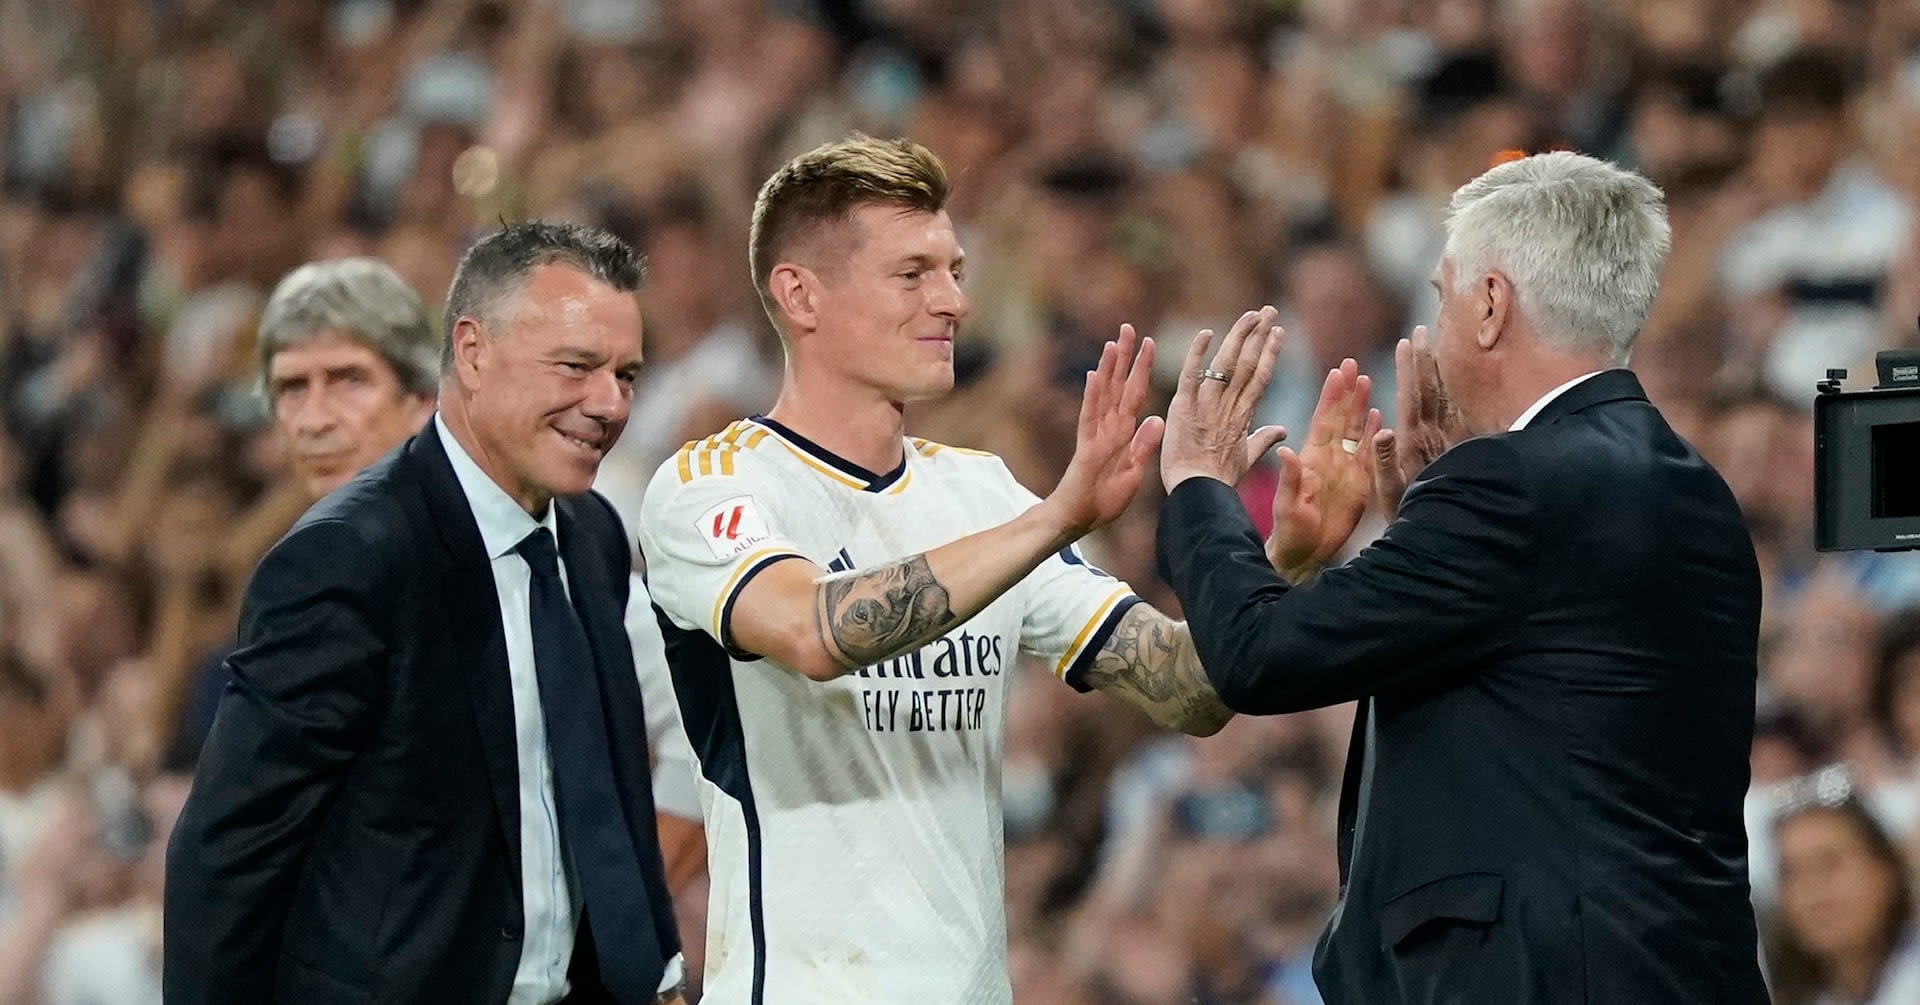 Kroos will leave at the top, Ancelotti says